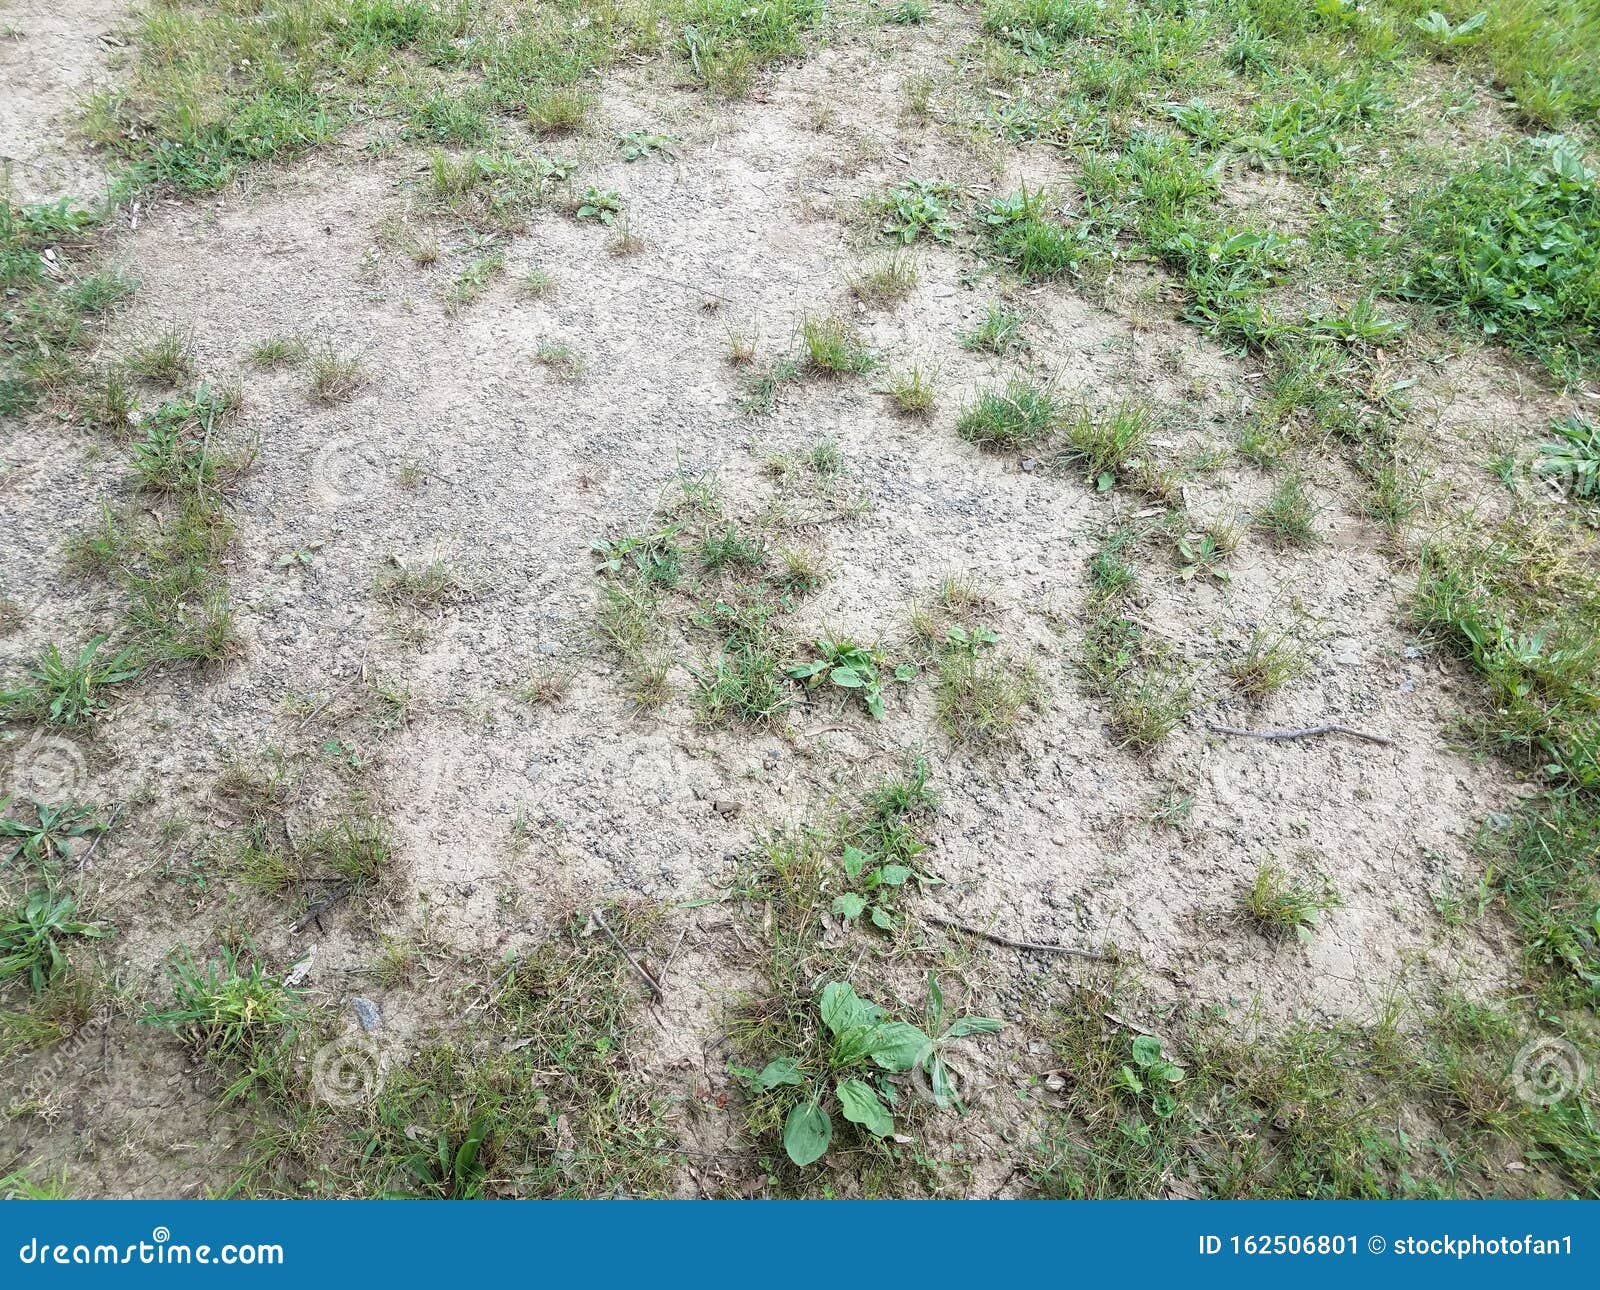 Dirt Or Soil Patches In Green Grass Lawn Stock Image Image Of Dirt